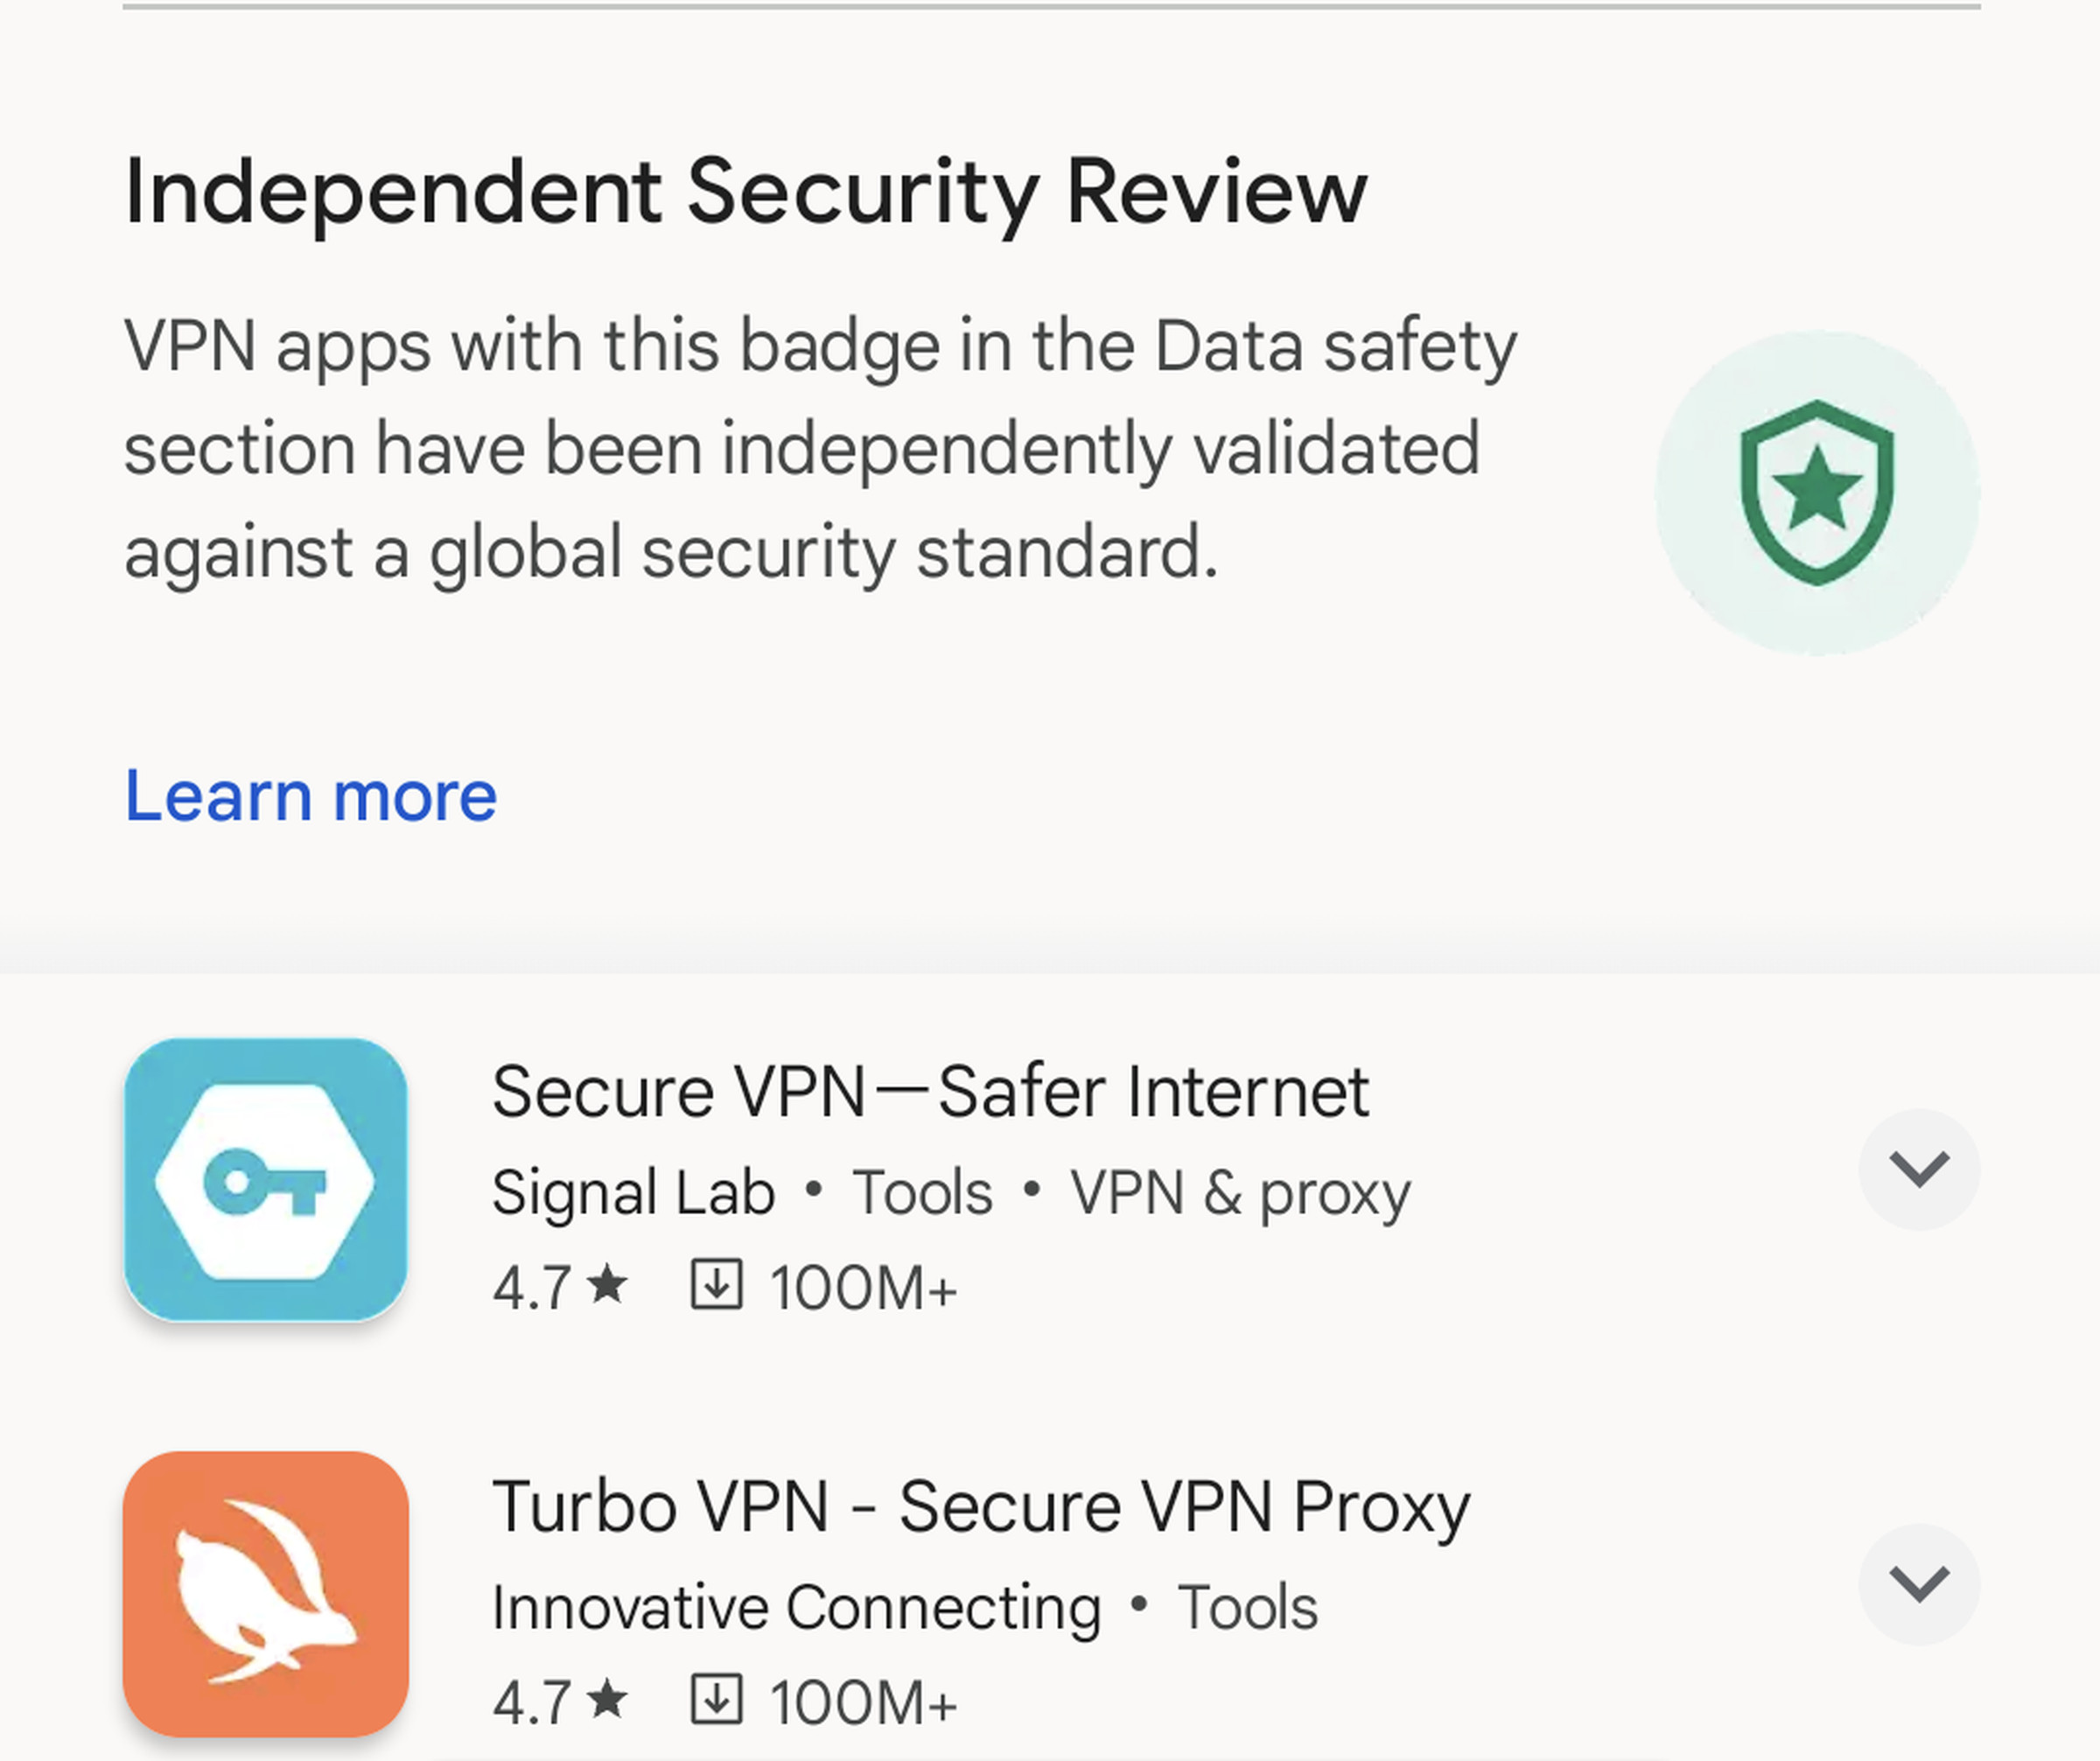 A screenshot of the new banner, which shows a picture of the security review badge and includes a “Learn more” link.